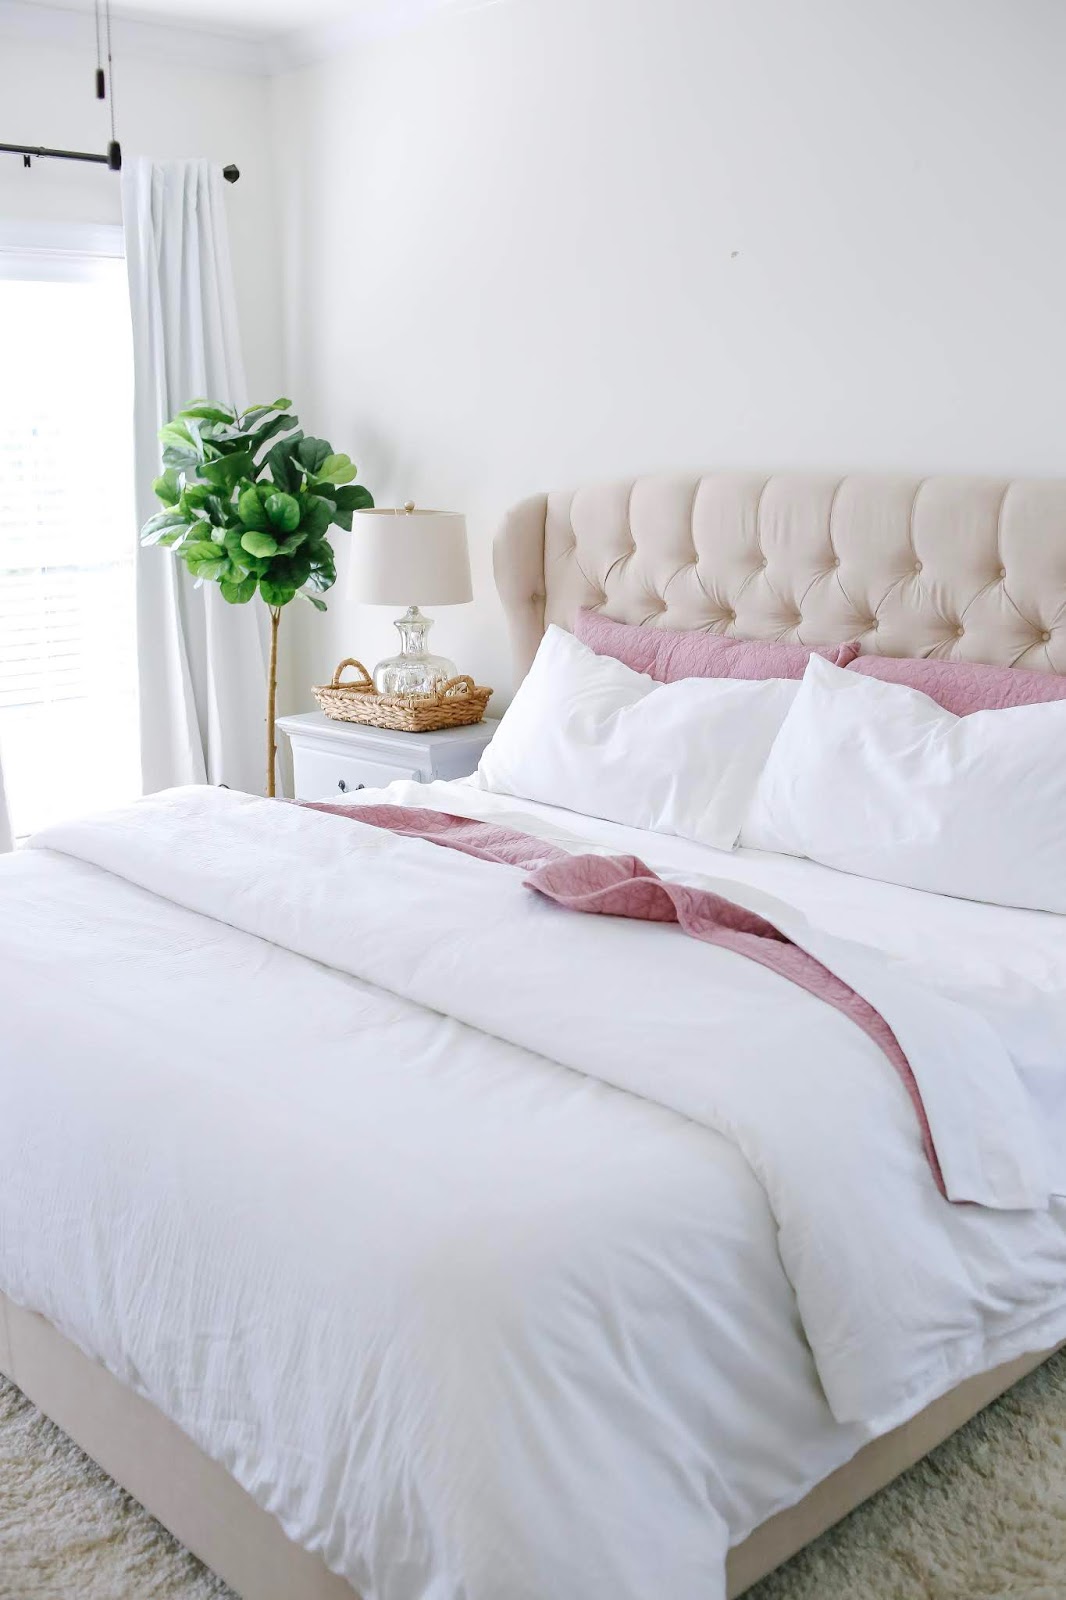 Bedding Refresh With Tuesday Morning, Tuesday Morning Duvet Covers